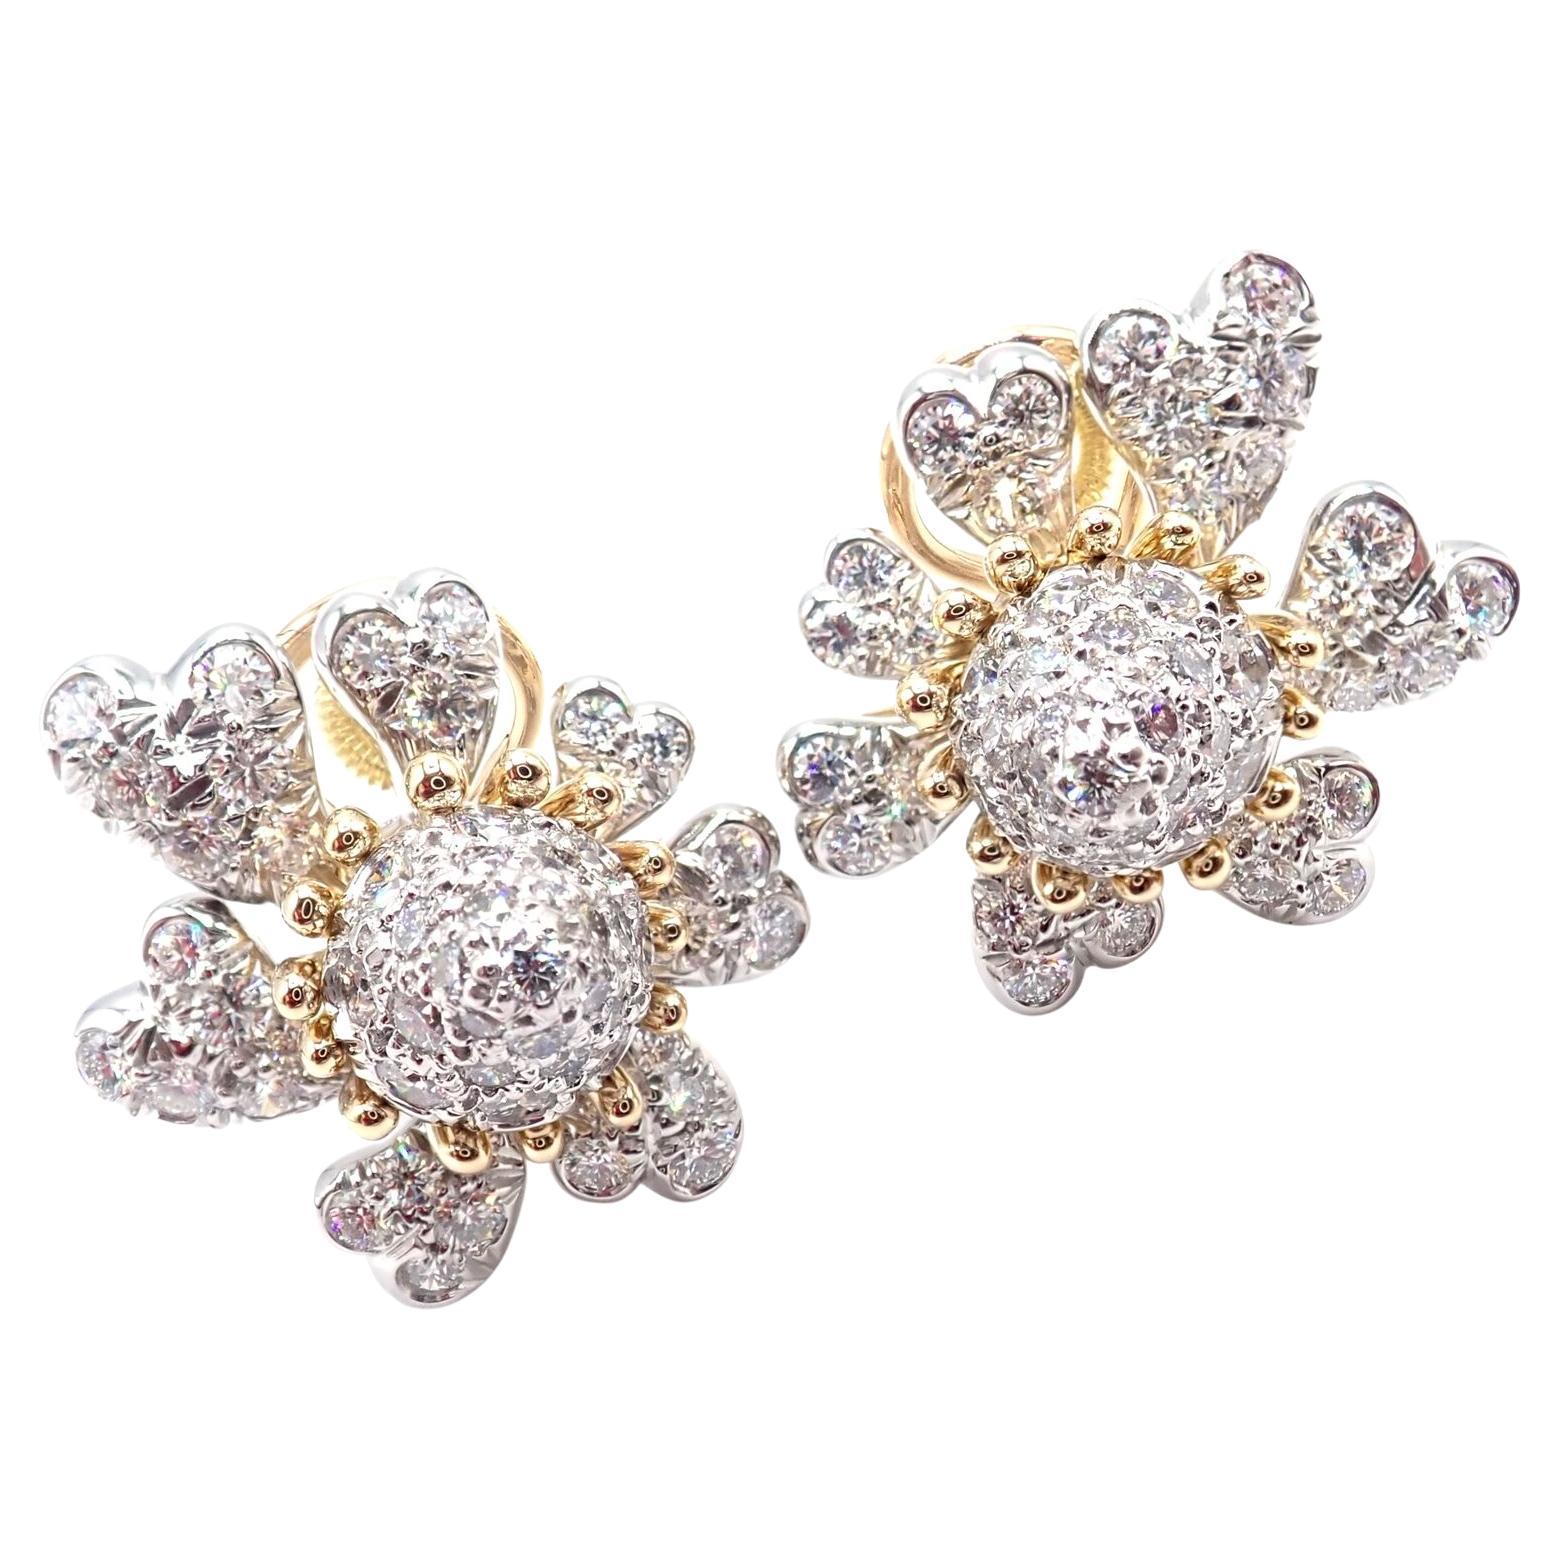 Shop Platinum Earrings at Offer Price - Candere by Kalyan Jewellers